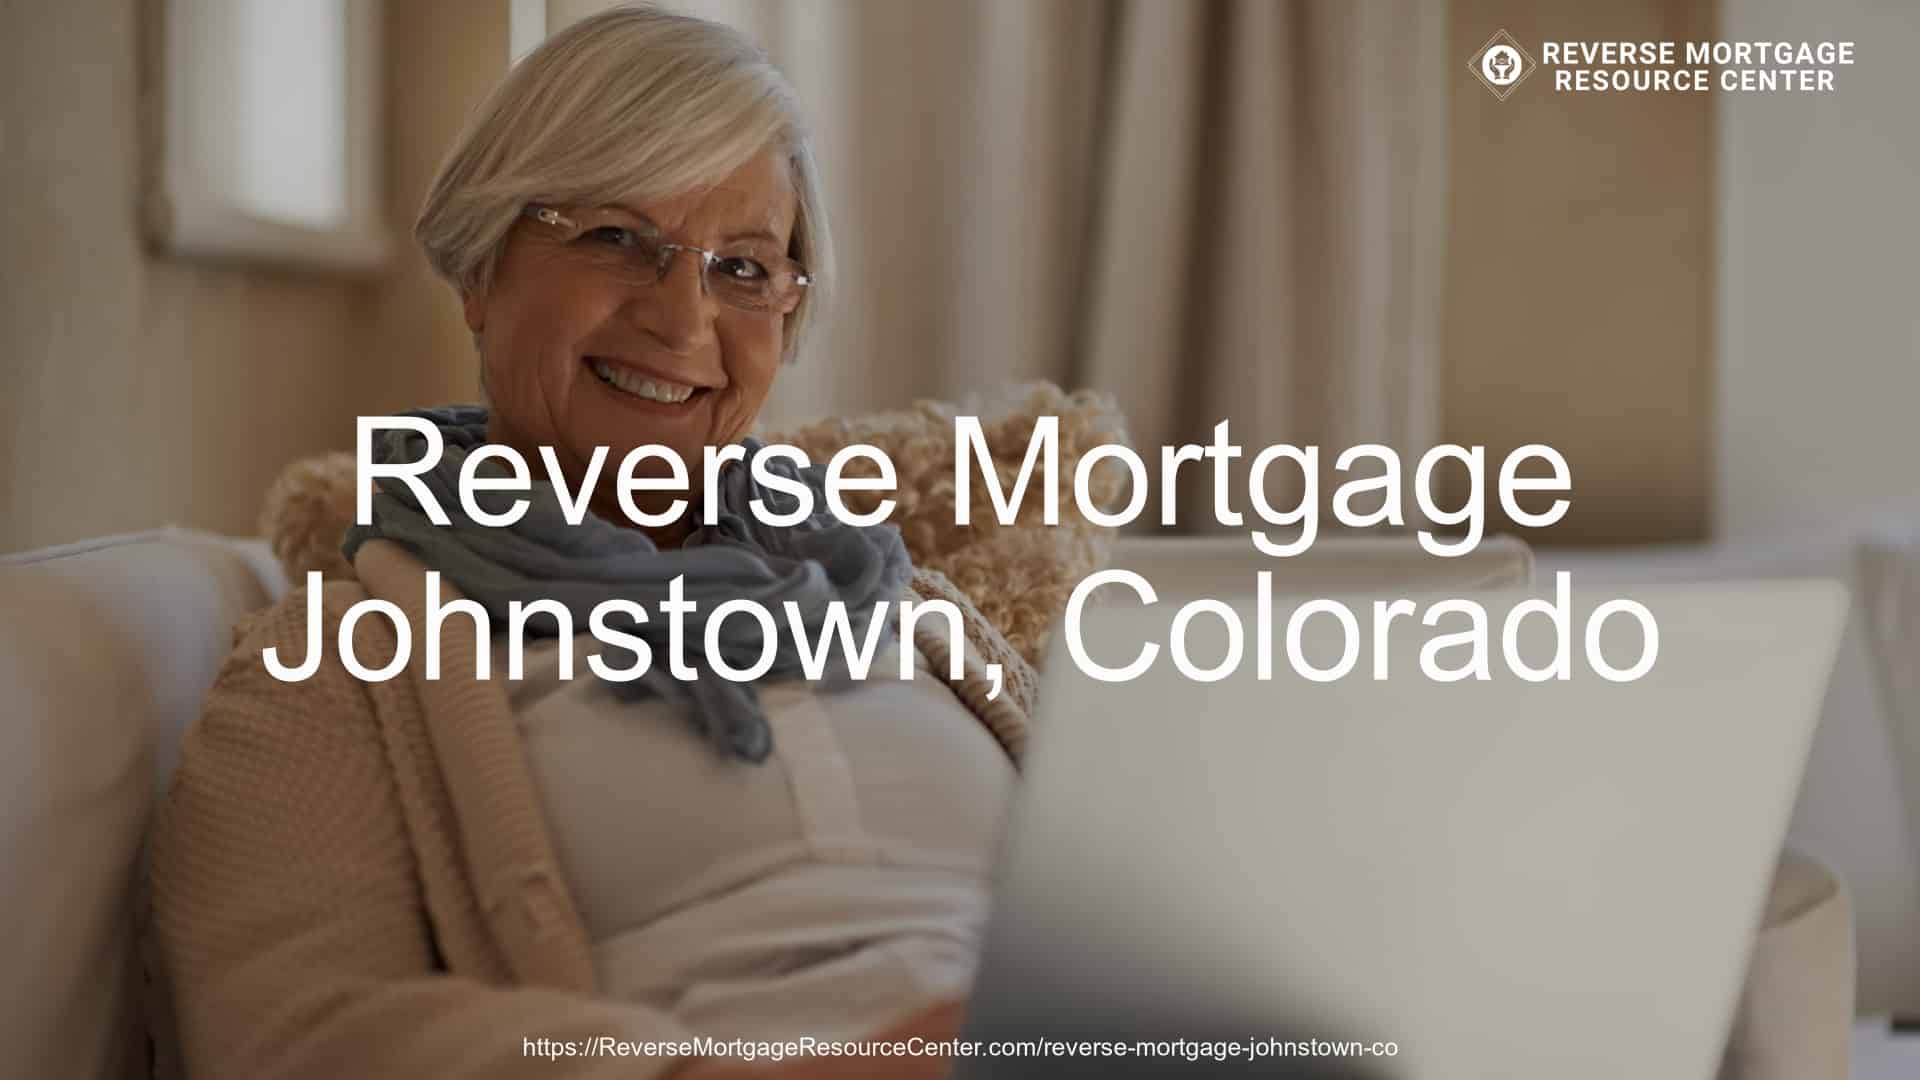 Reverse Mortgage Loans in Johnstown Colorado